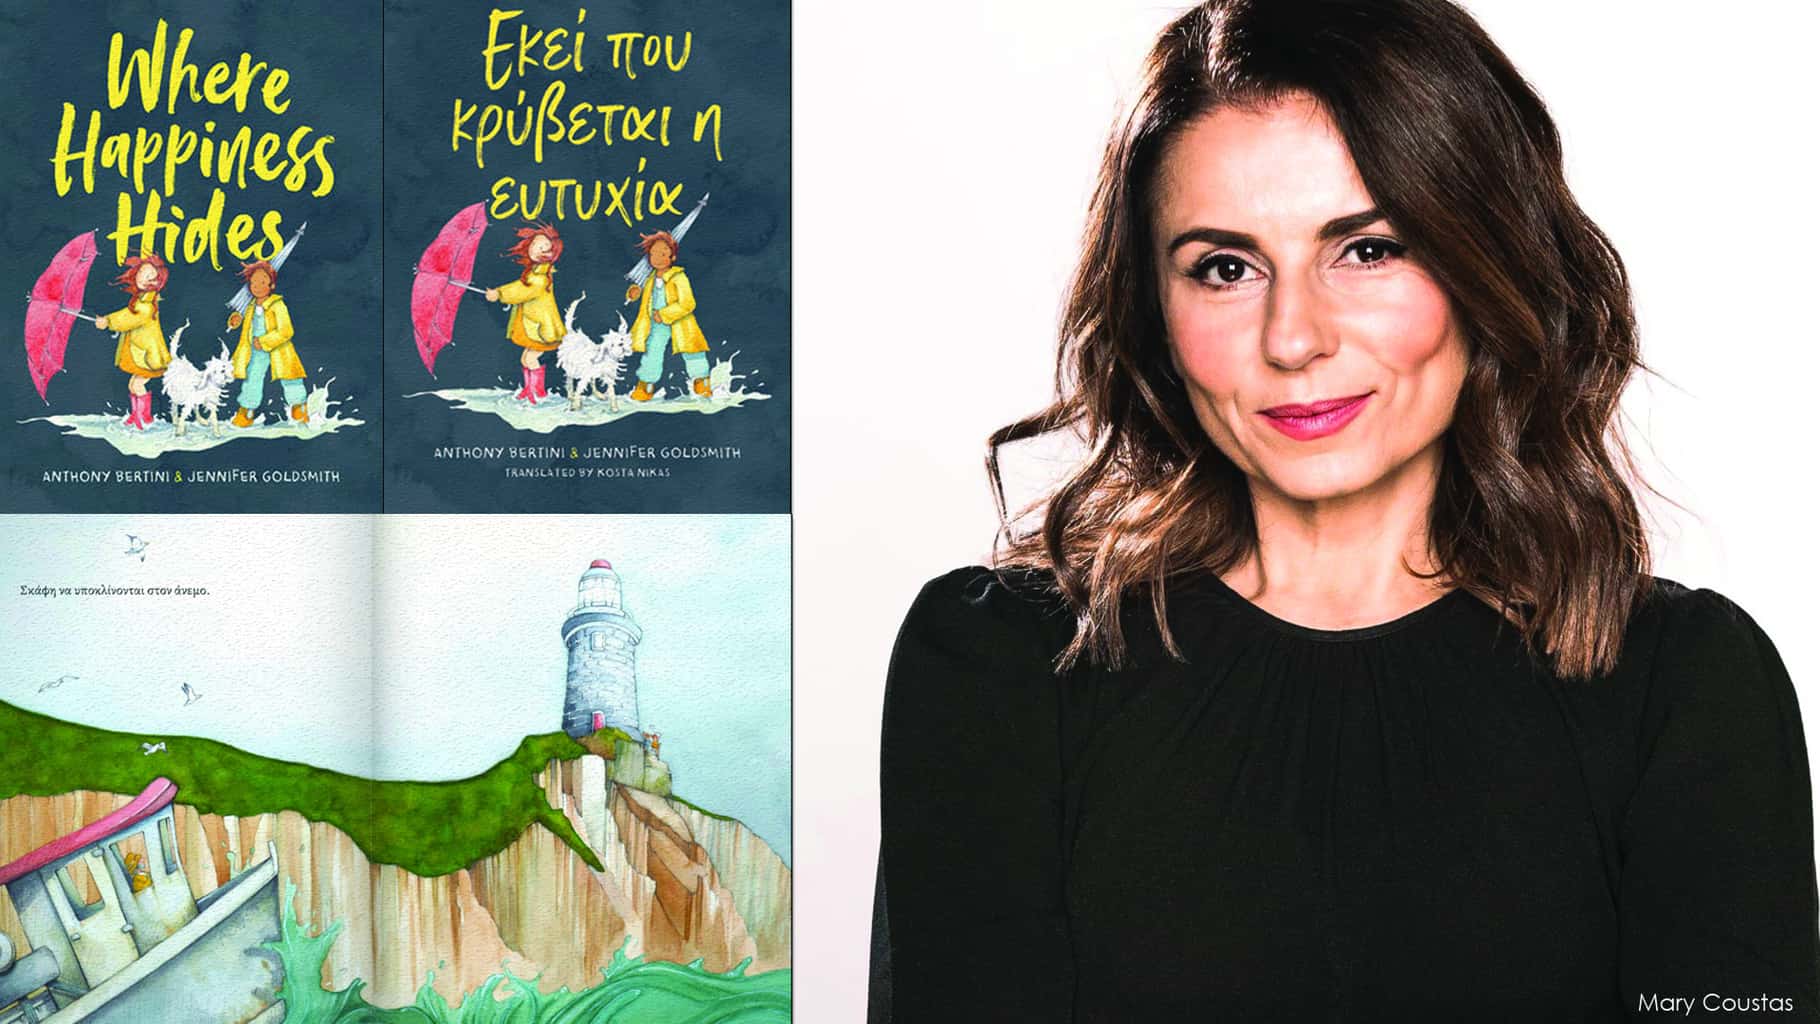 Australian comedy icon Mary Coustas takes readers on a Greek discovery of happiness in new children’s audio-book